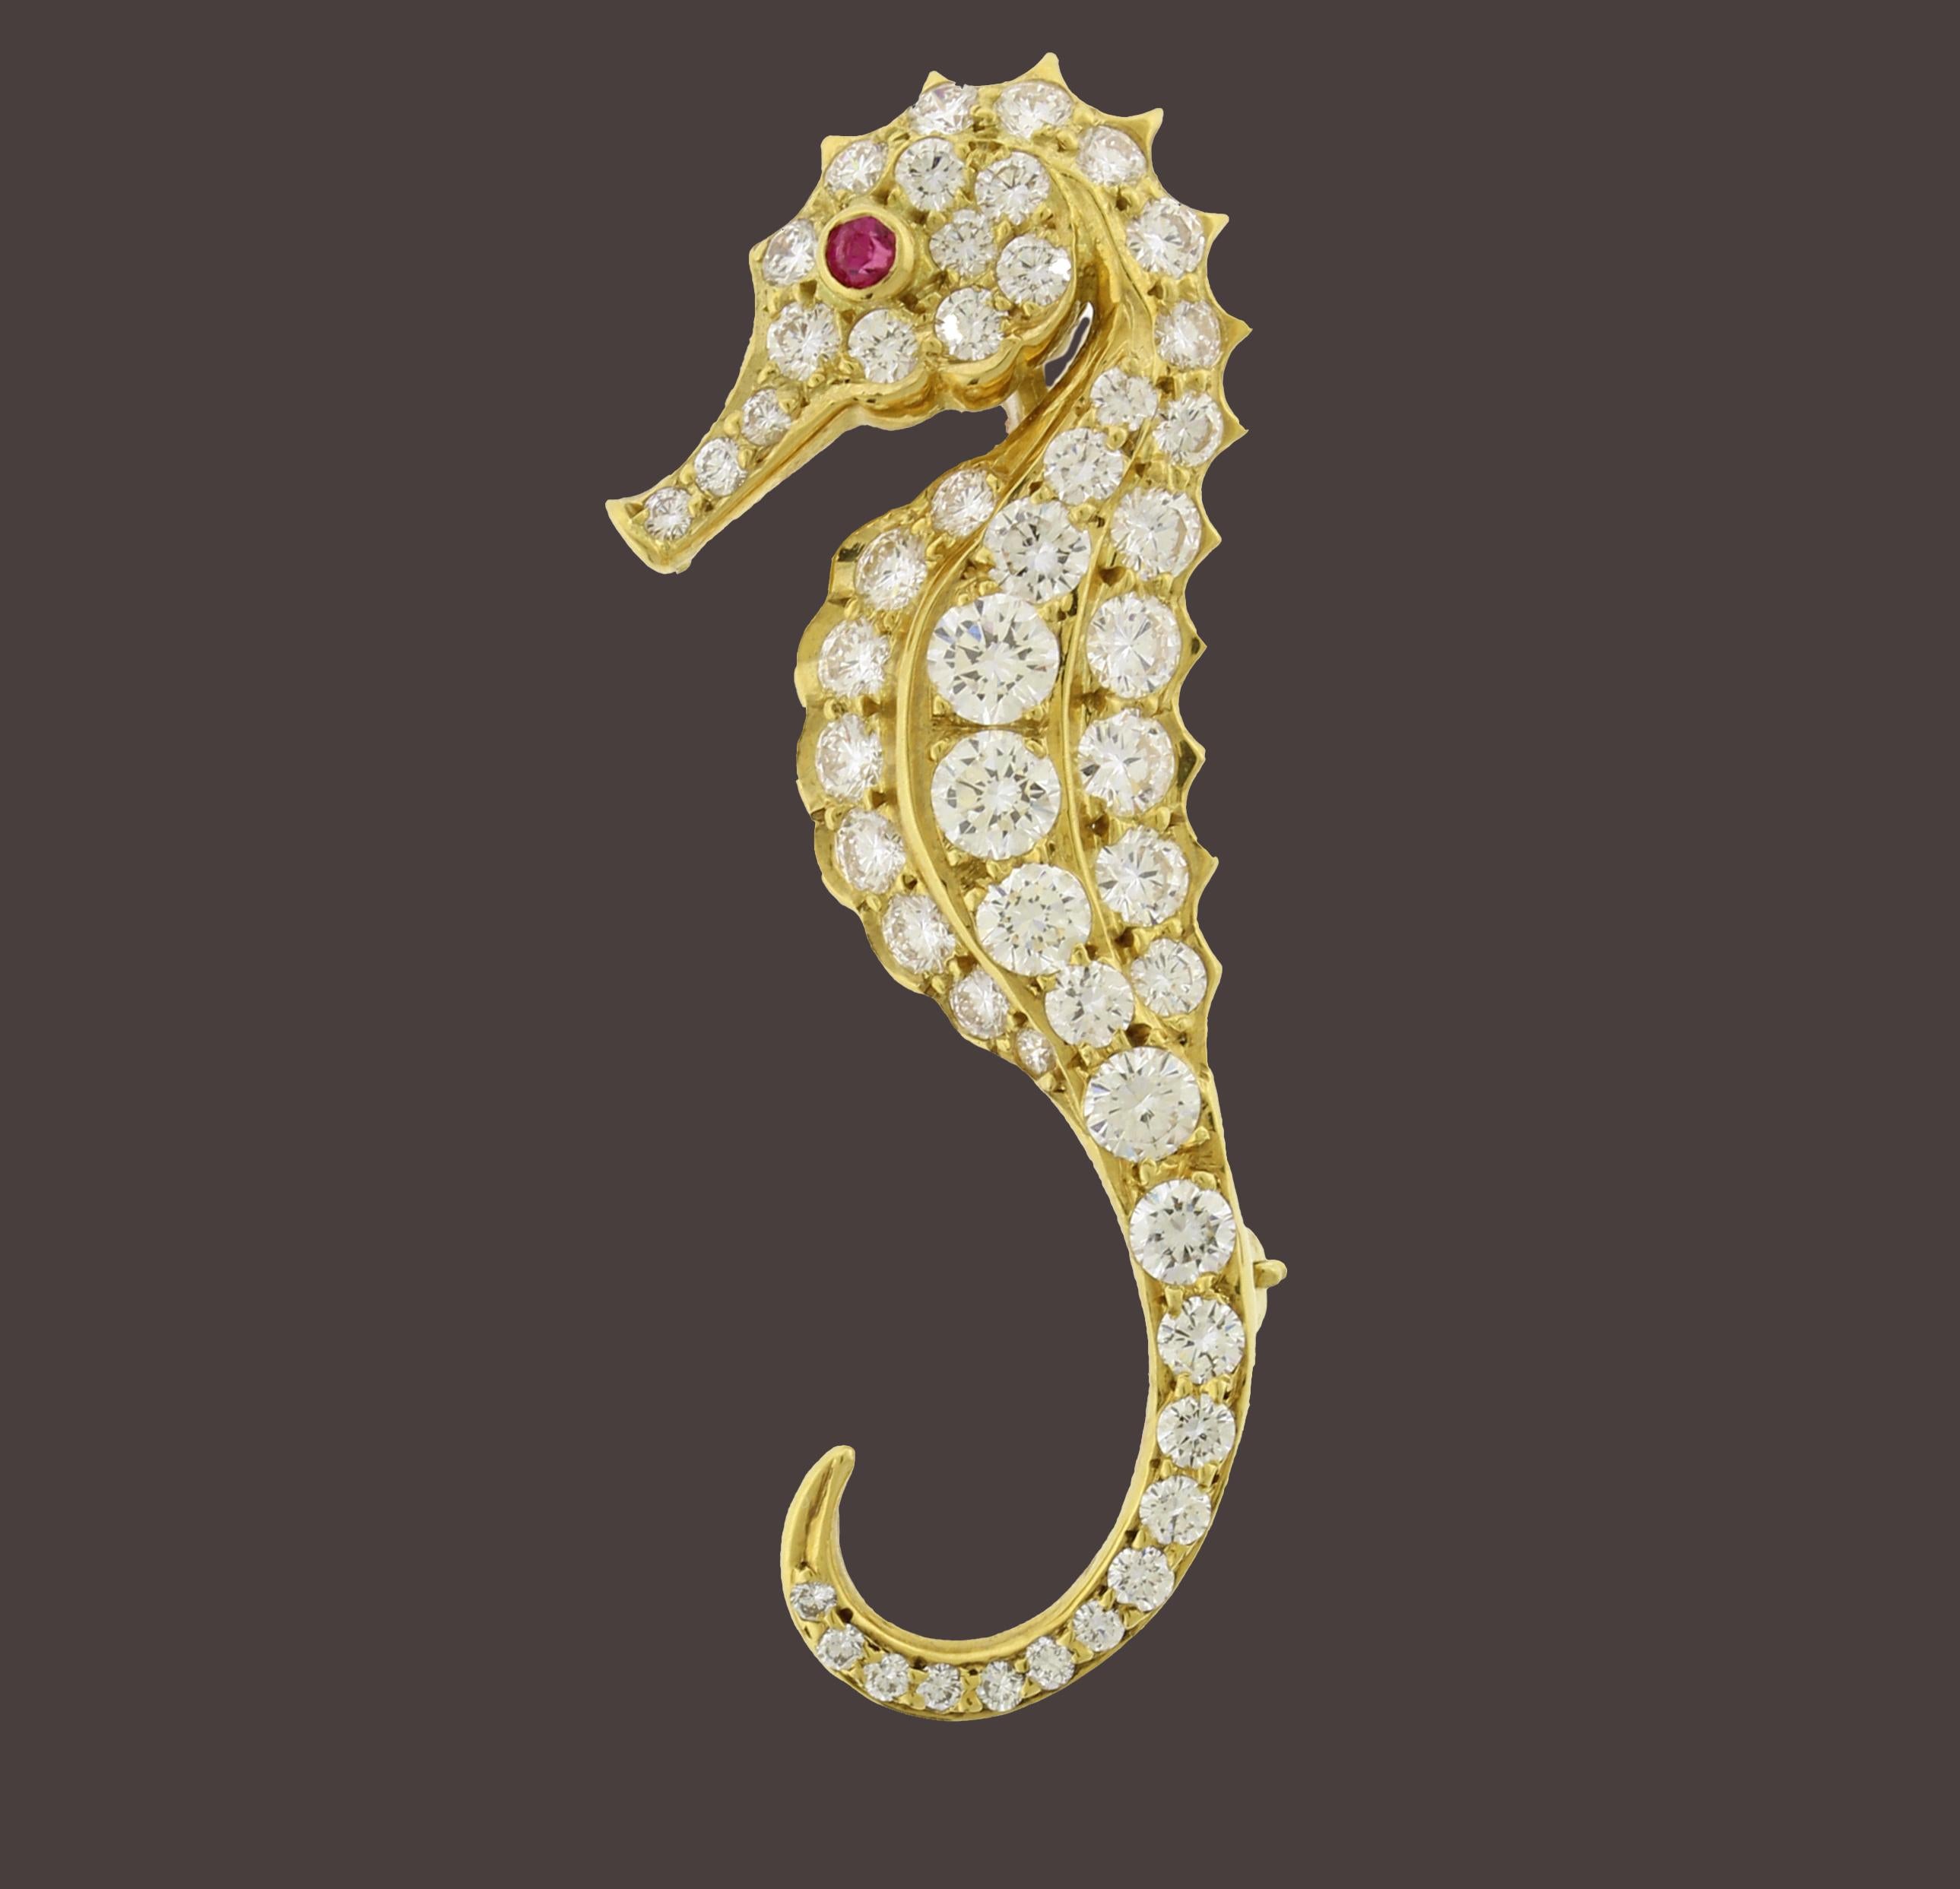 Women's or Men's Diamond and Ruby Seahorse Brooch by Pampillonia Jewelers